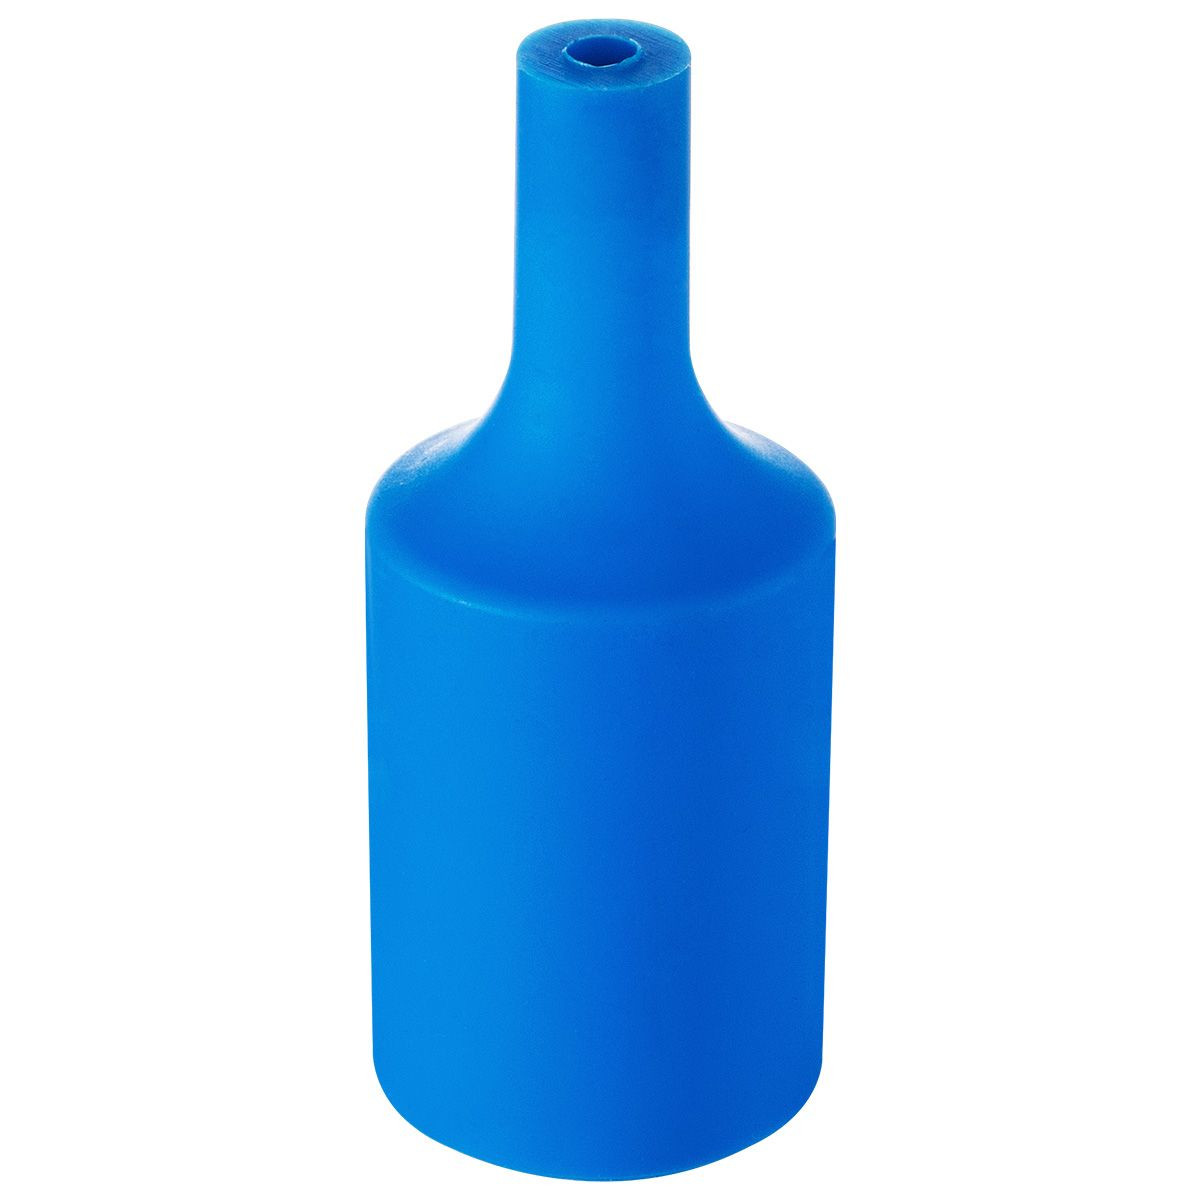 Light depot - fitting huls Rubber - blauw - Outlet